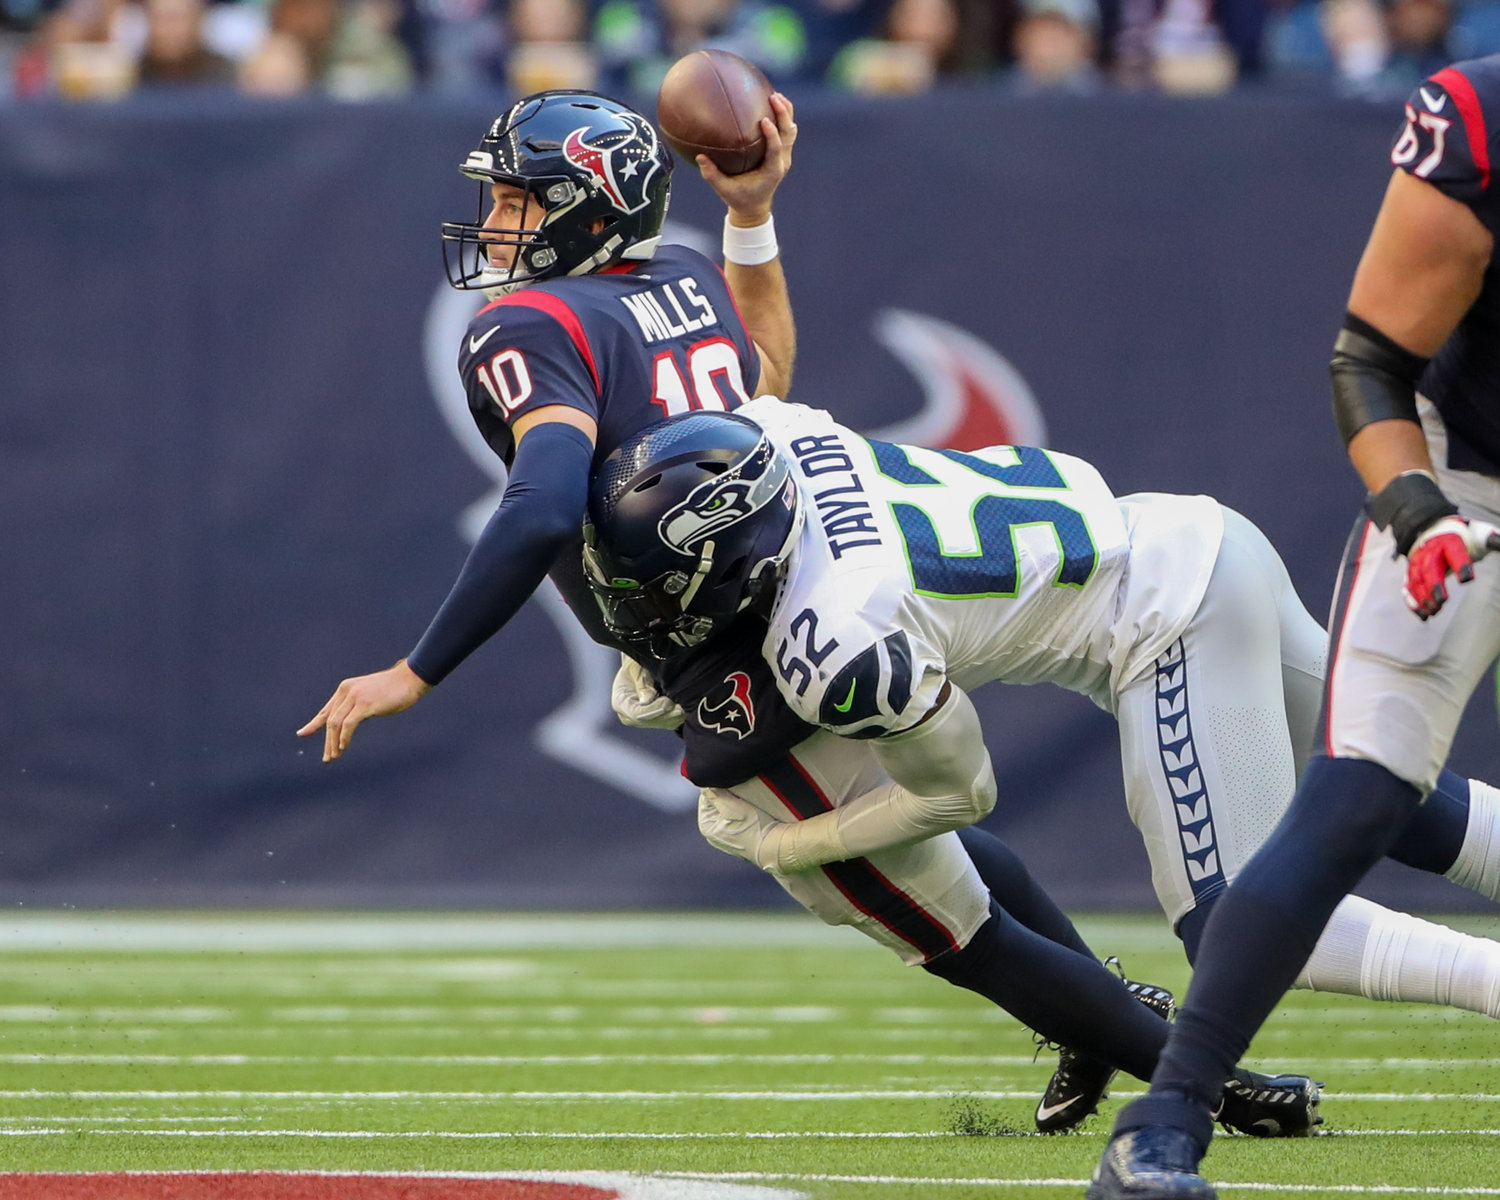 Seattle Seahawks defensive end Darrell Taylor (52) sacks Houston Texans quarterback Davis Mills (10) during the second half of an NFL game between the Seahawks and the Texans on December 12, 2021 in Houston, Texas.